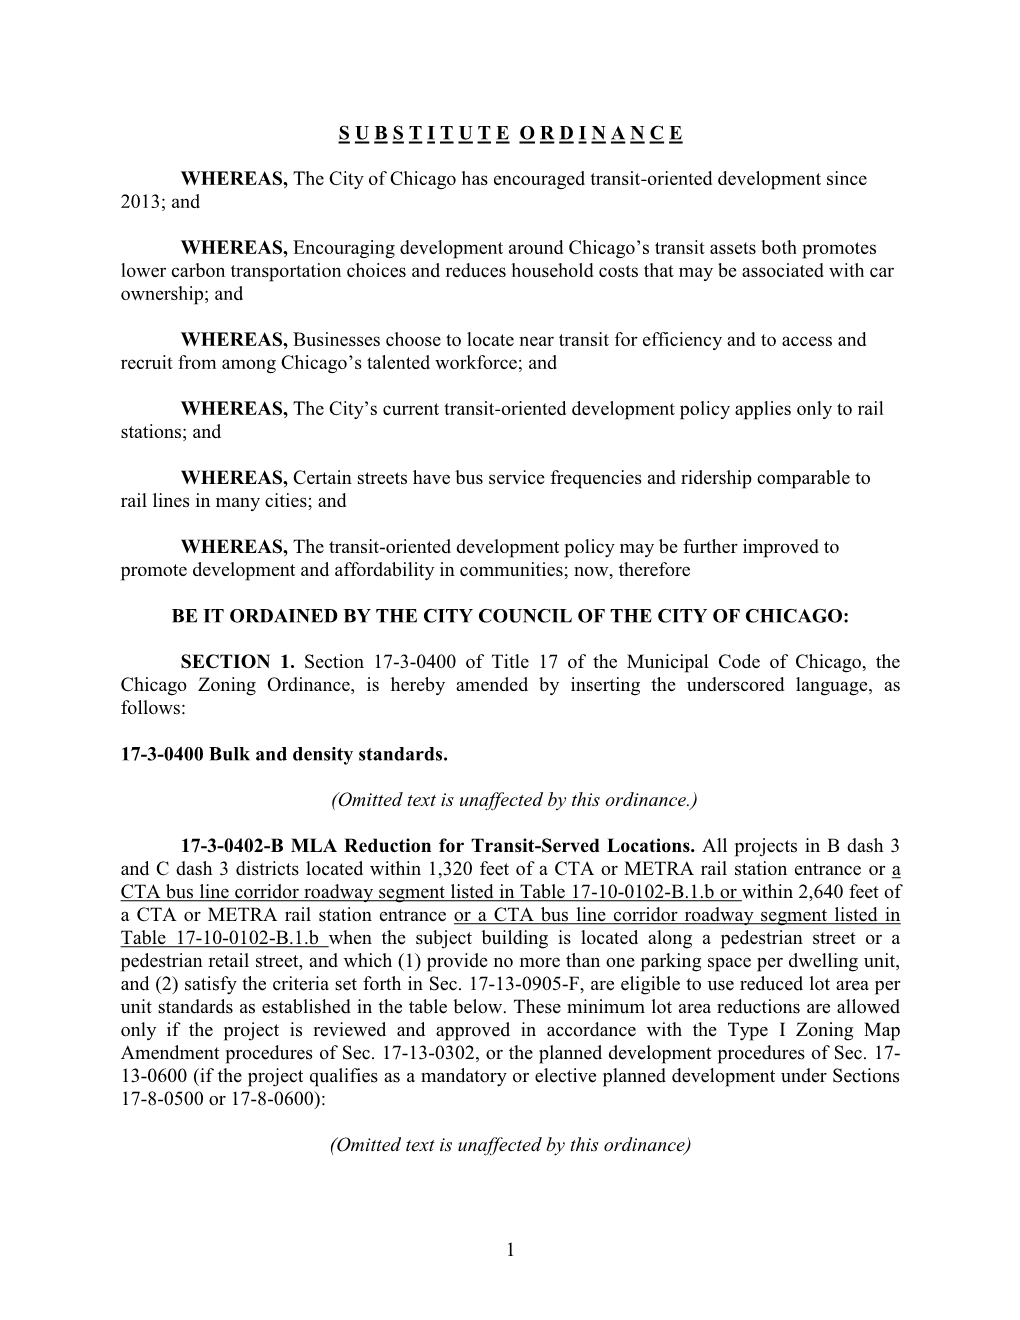 1 SUBSTITUTEORDINANCE WHEREAS, the City of Chicago Has Encouraged Transit-Oriented Development Since 2013